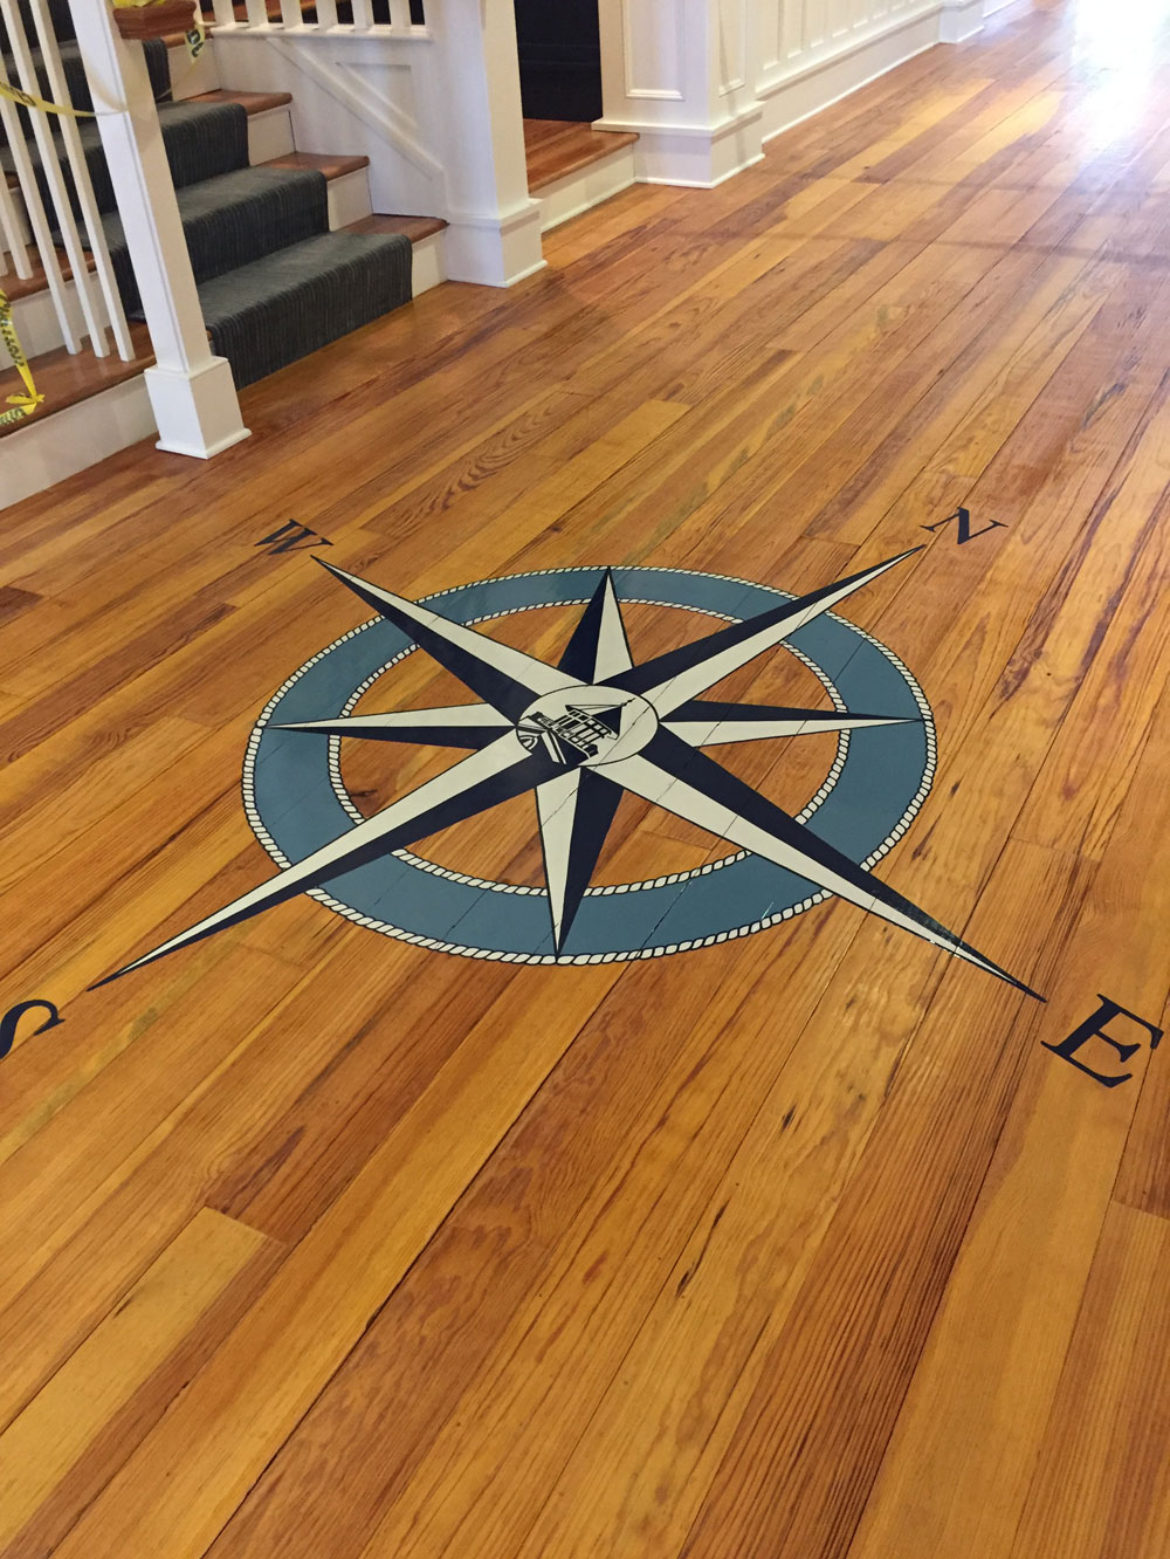 Finished Compass Rose